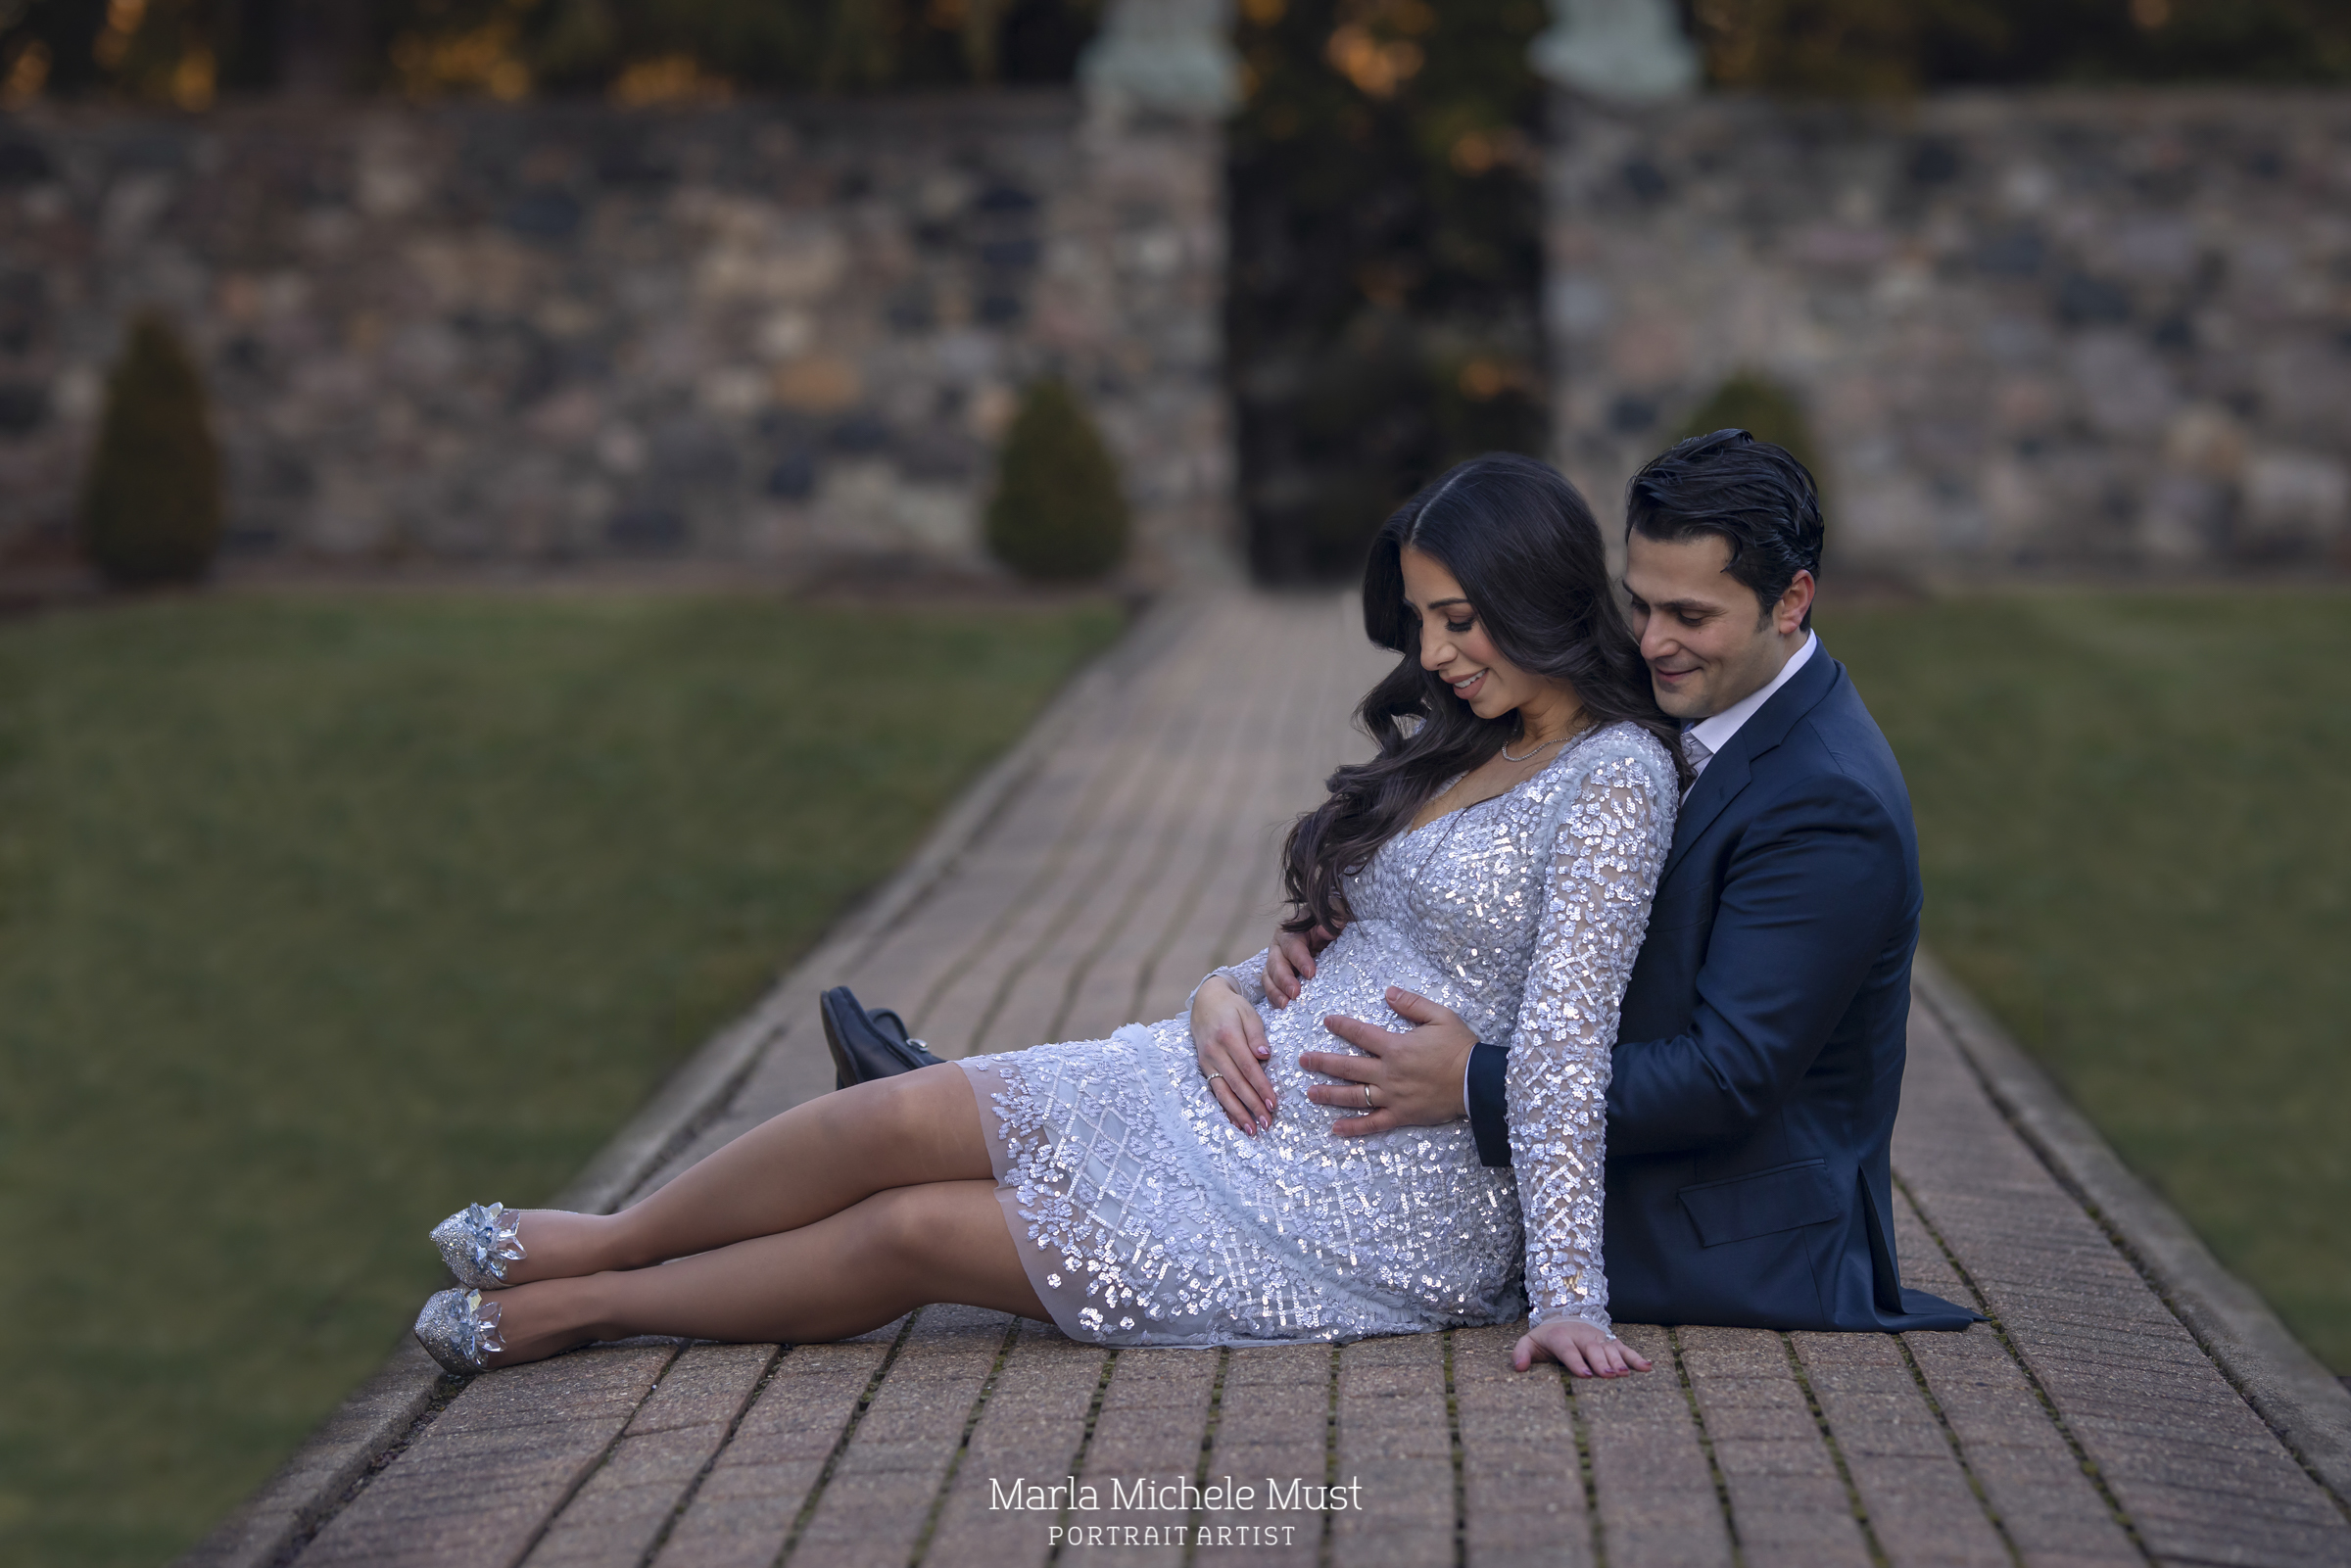 A formally dressed expecting mother and her partner sit together on a pathway in a Detroit park for a maternity photoshoot; a moment captured by a talented Michigan maternity photographer.